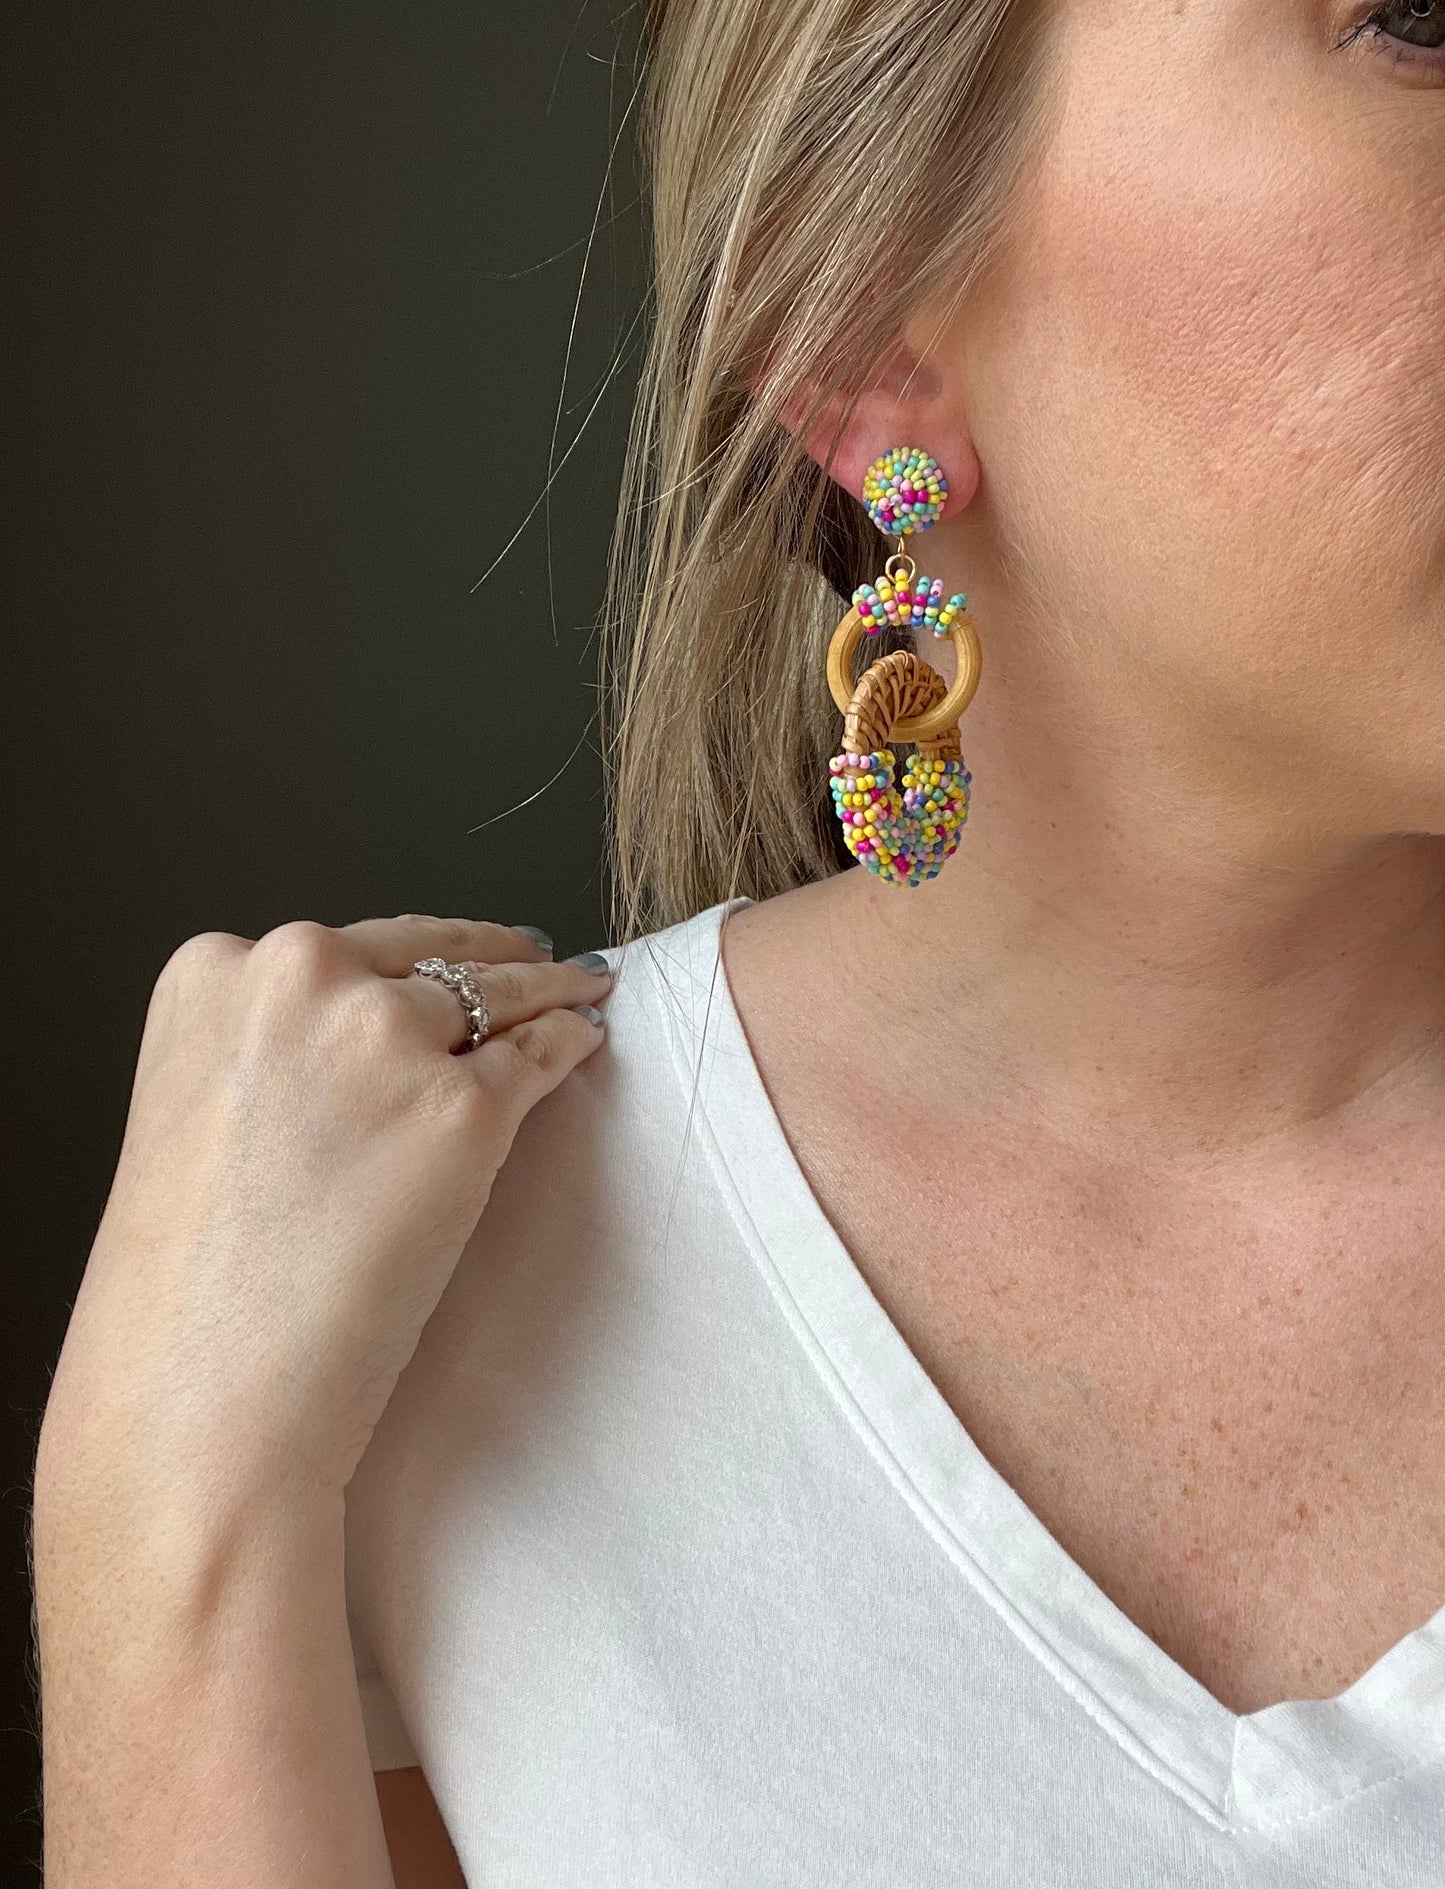 Life of the party earrings